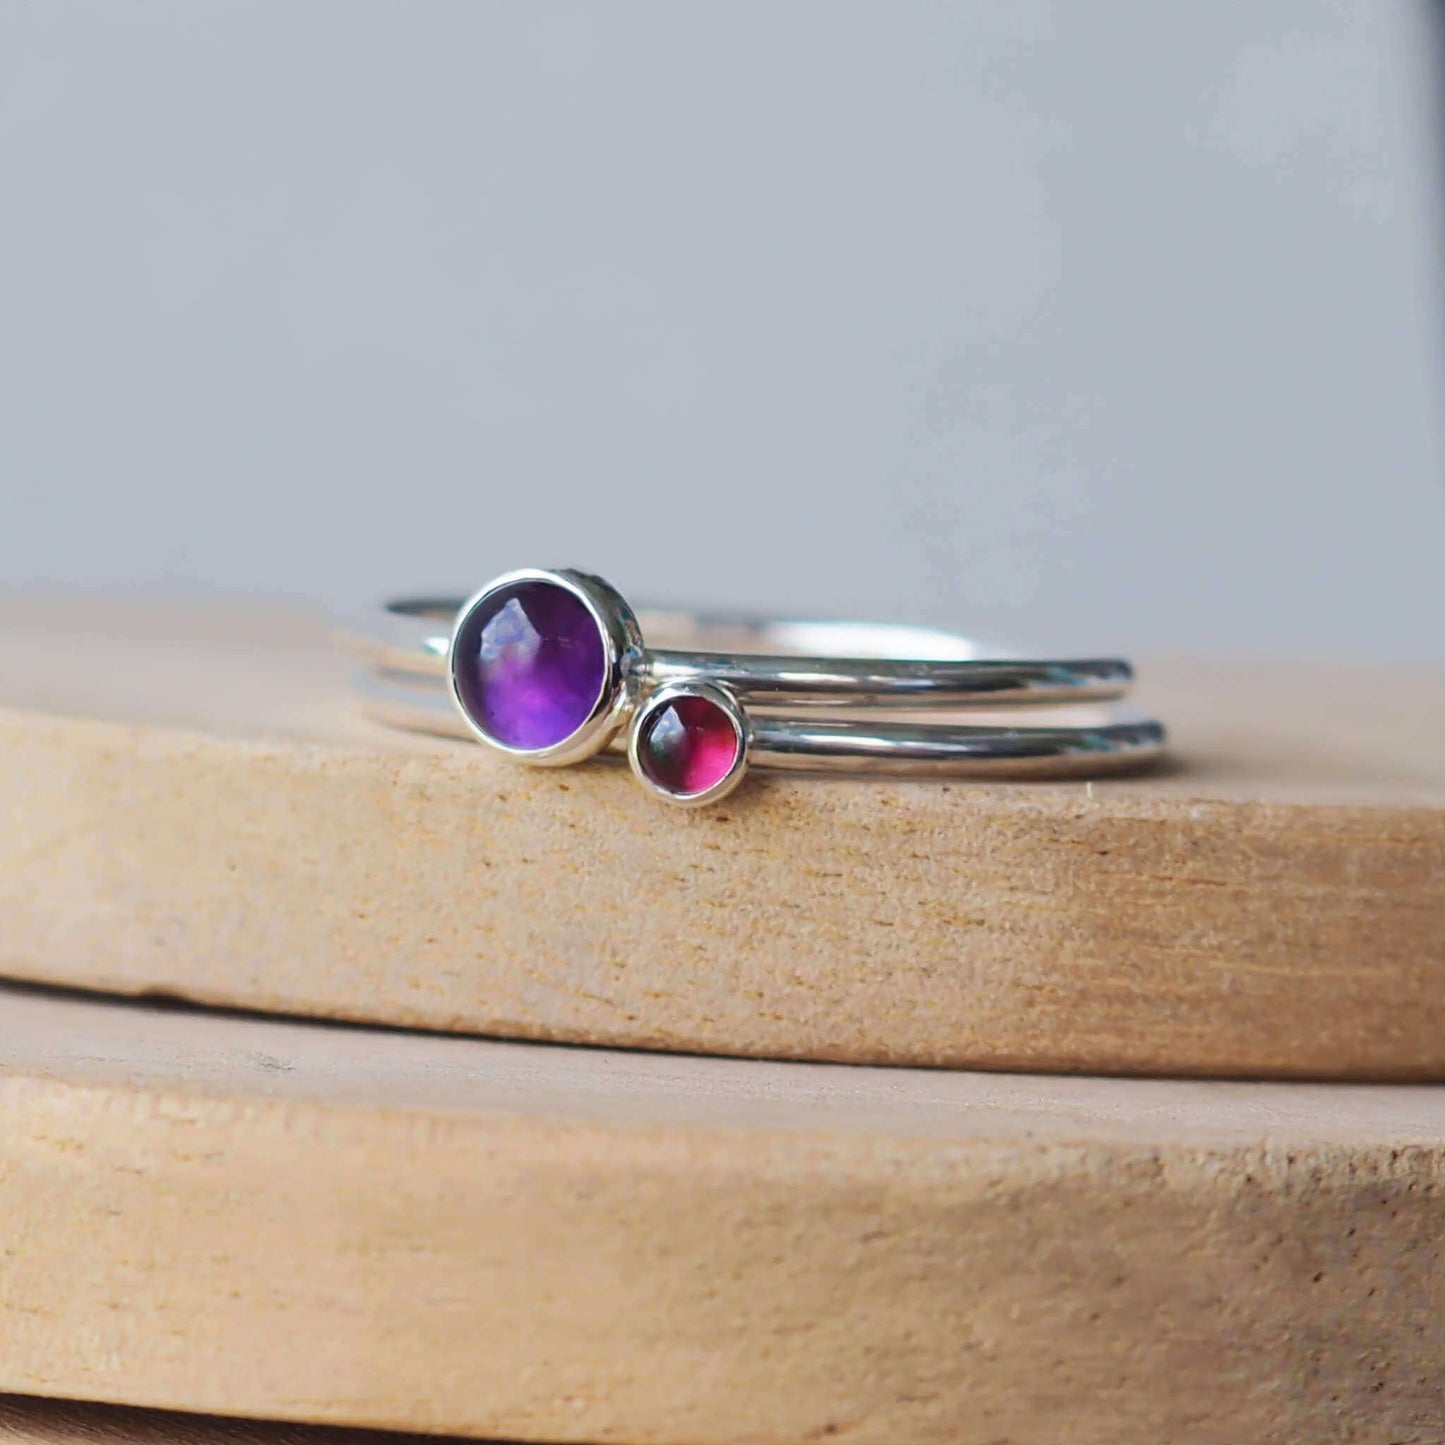 Double Ring set in Sterling Silver and gemstones in purple and red, The rings have two round gemstones of 5mm and 3mm size and are set simply onto round bands of sterling silver. These are February and January's birthstone and are hand made to your ring size by maram jewellery in Scotland